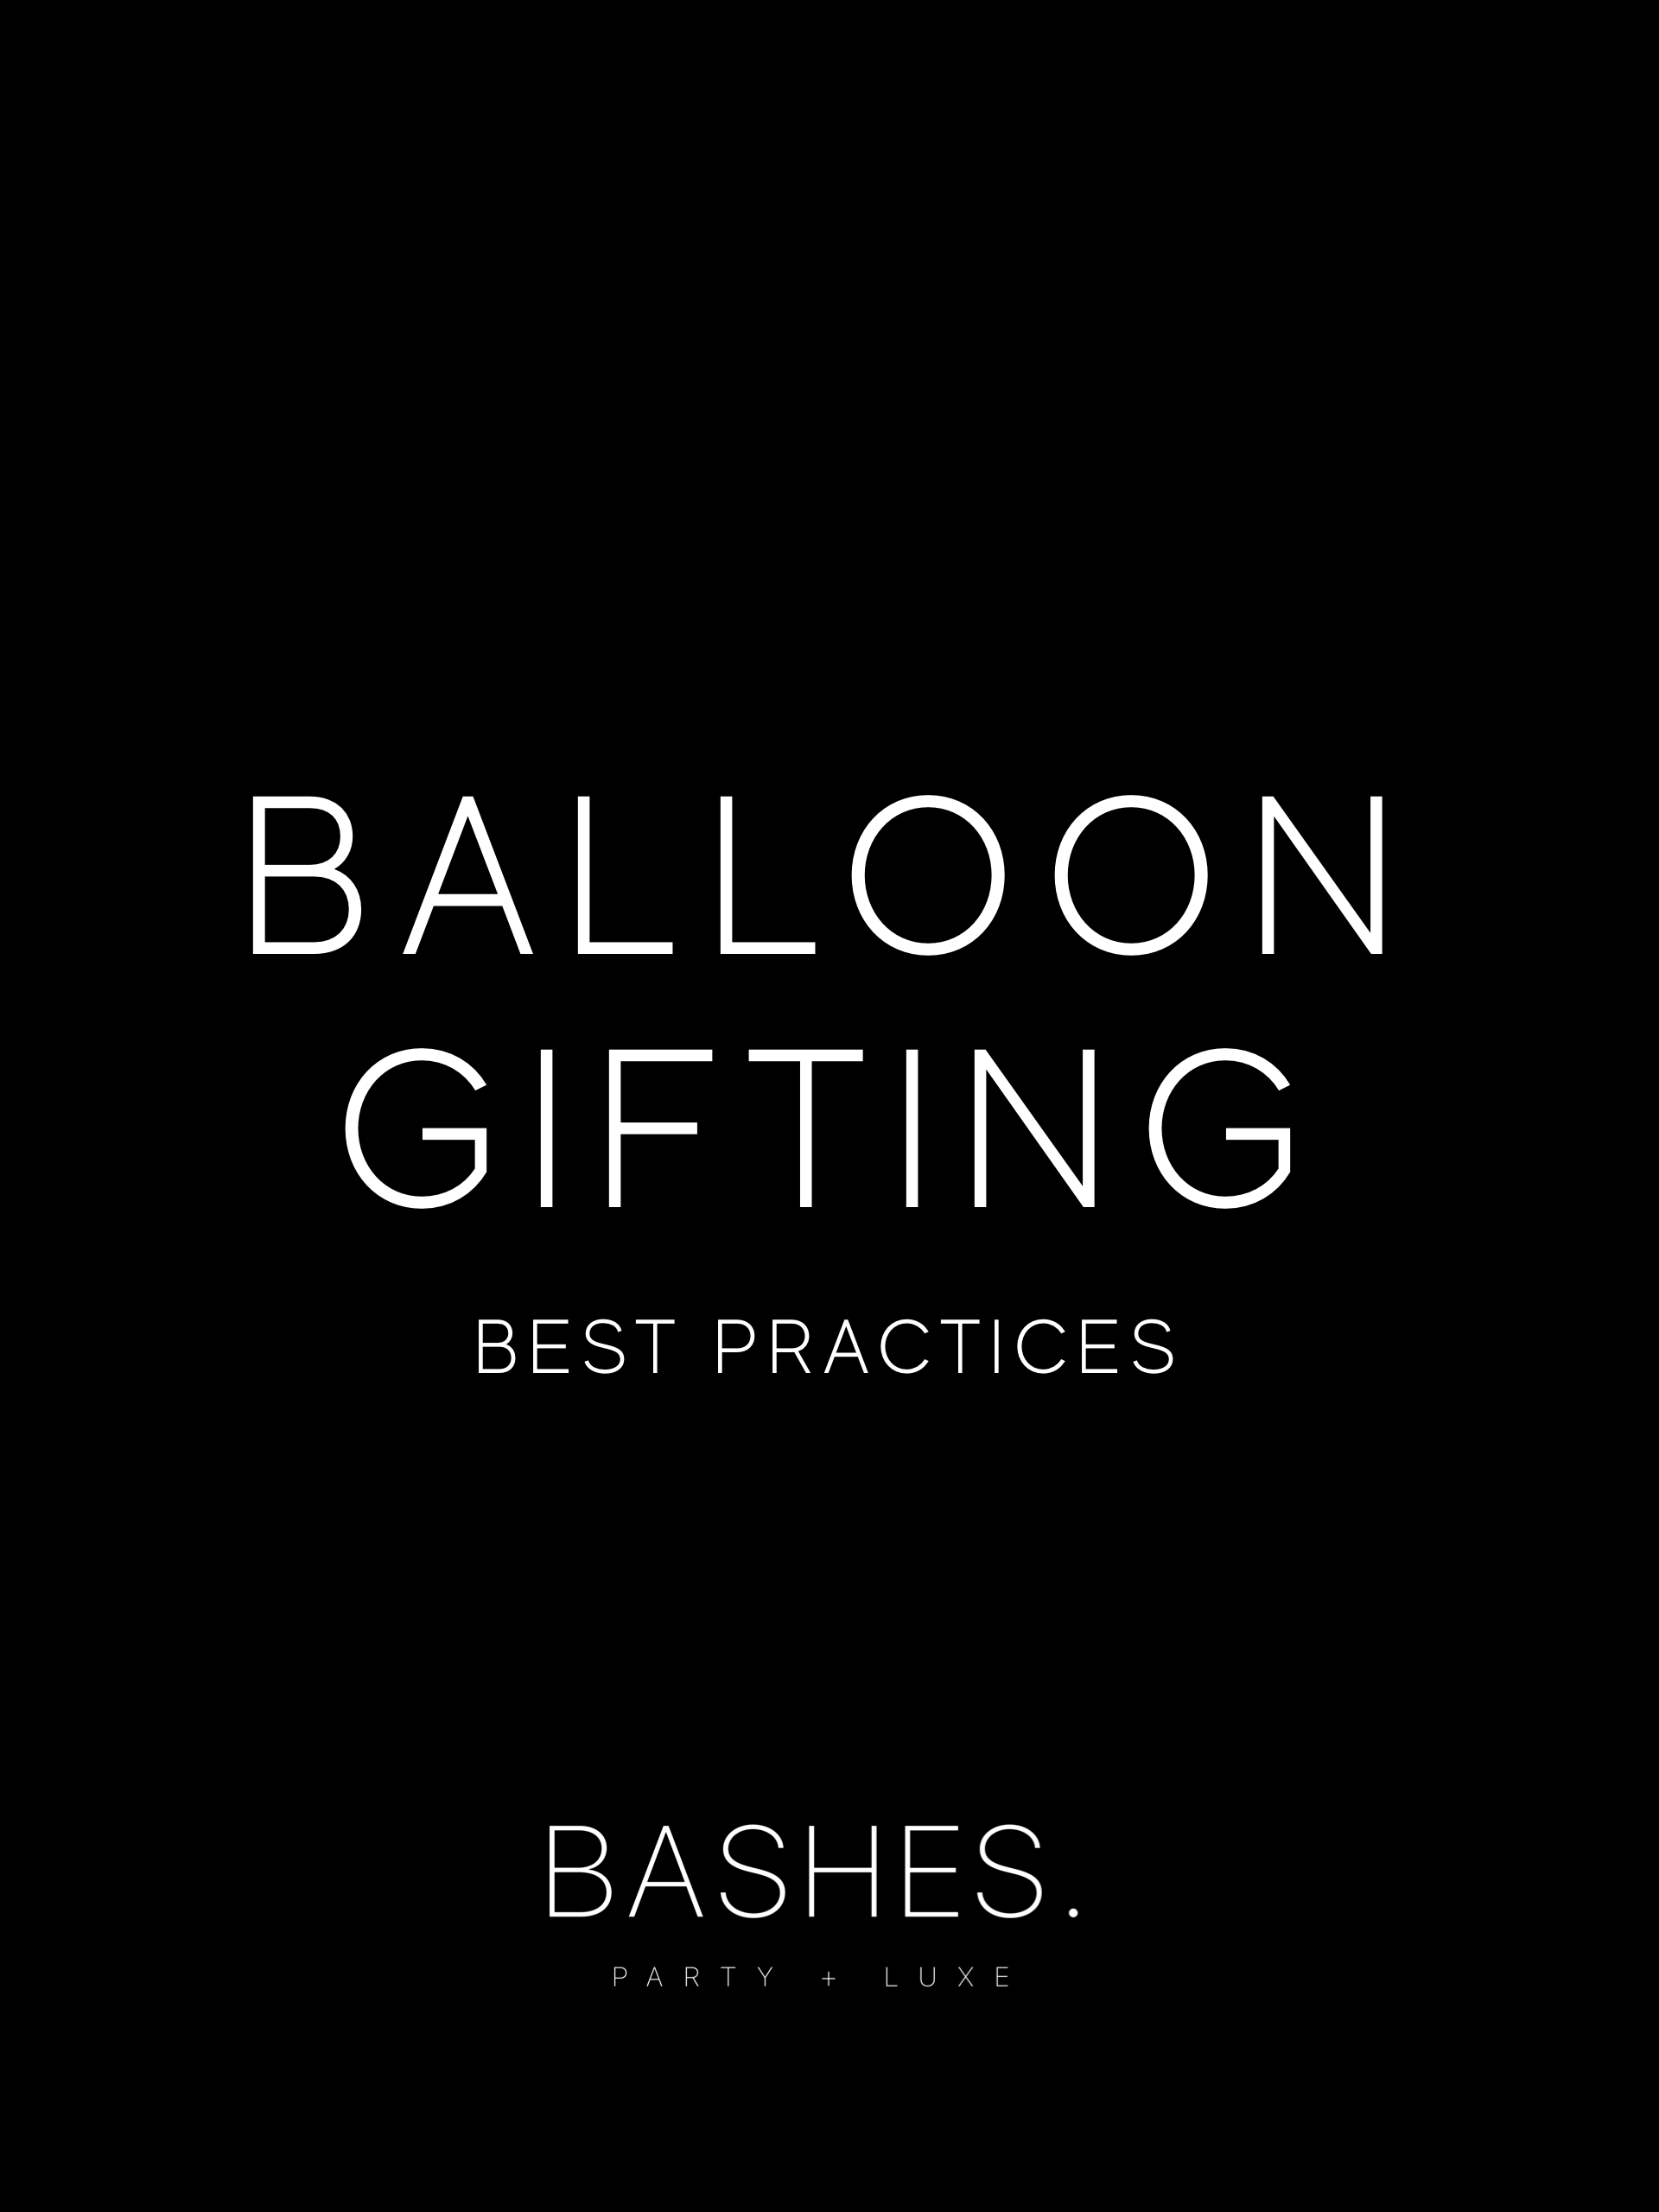 Balloon Gifting Best Practices